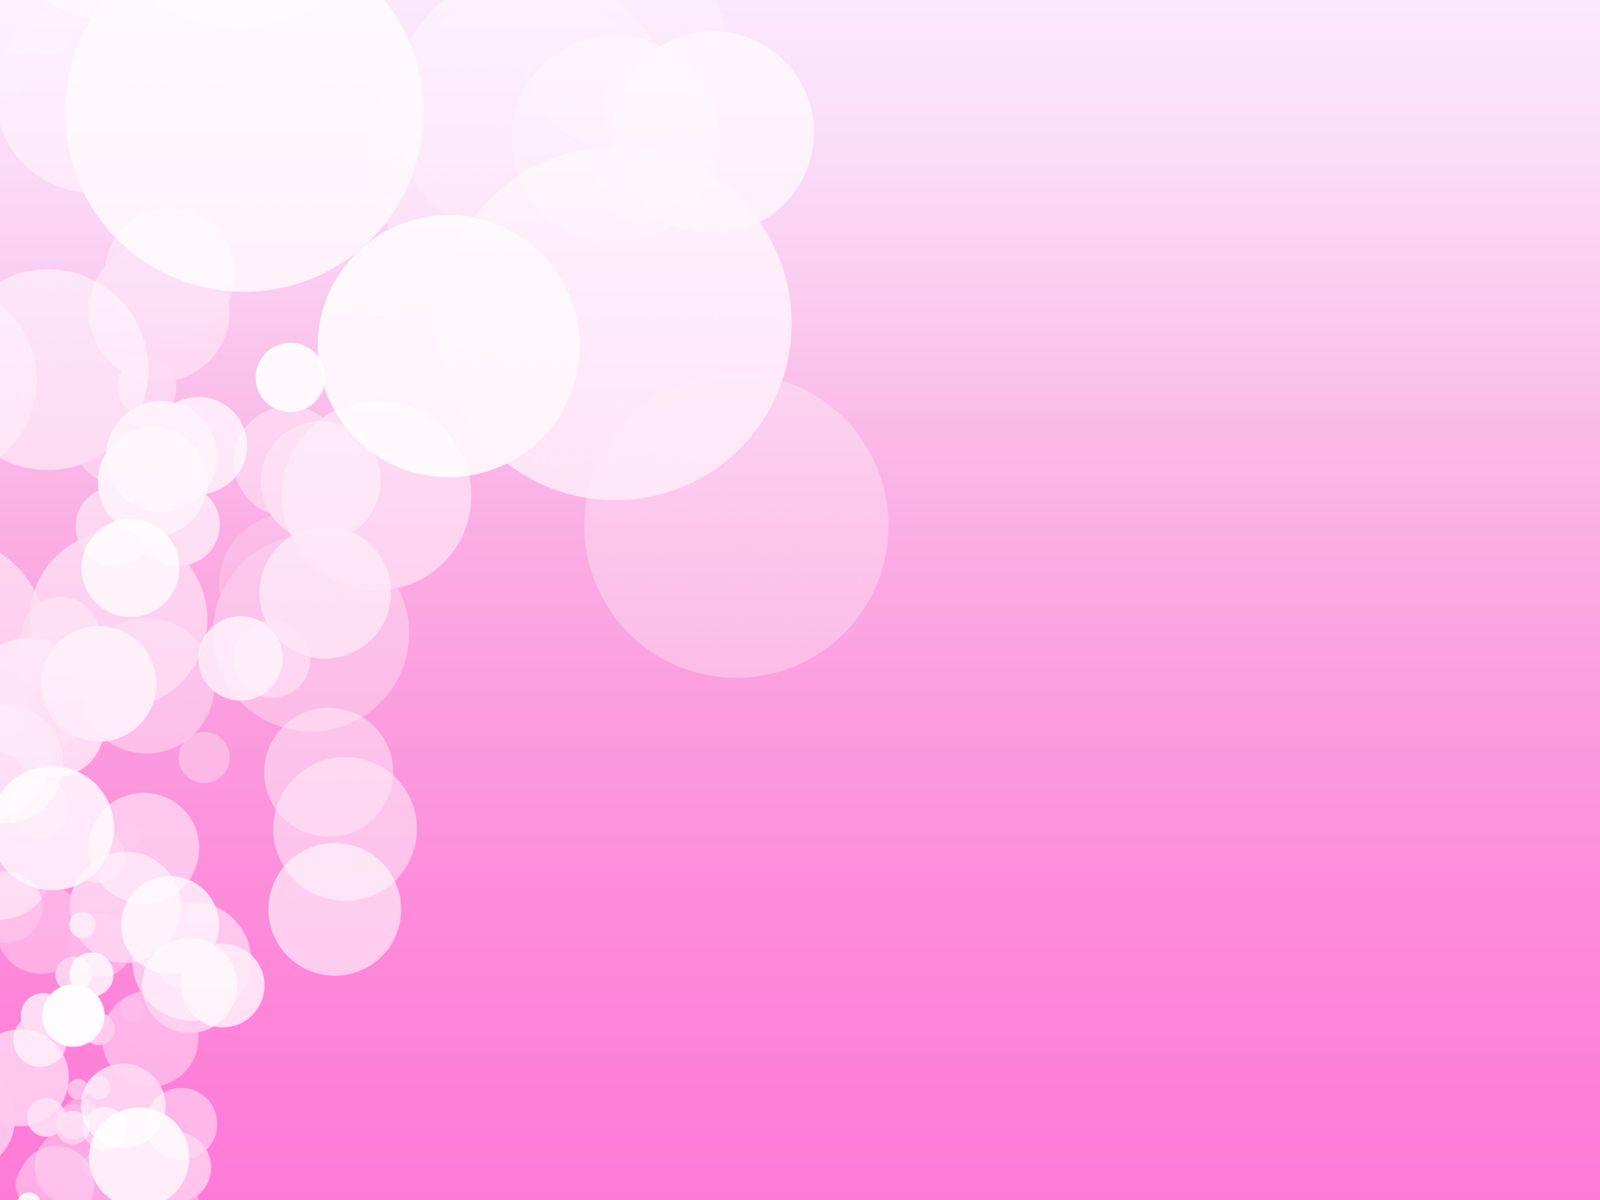 Free Bubbles On Pink Background For PowerPoint